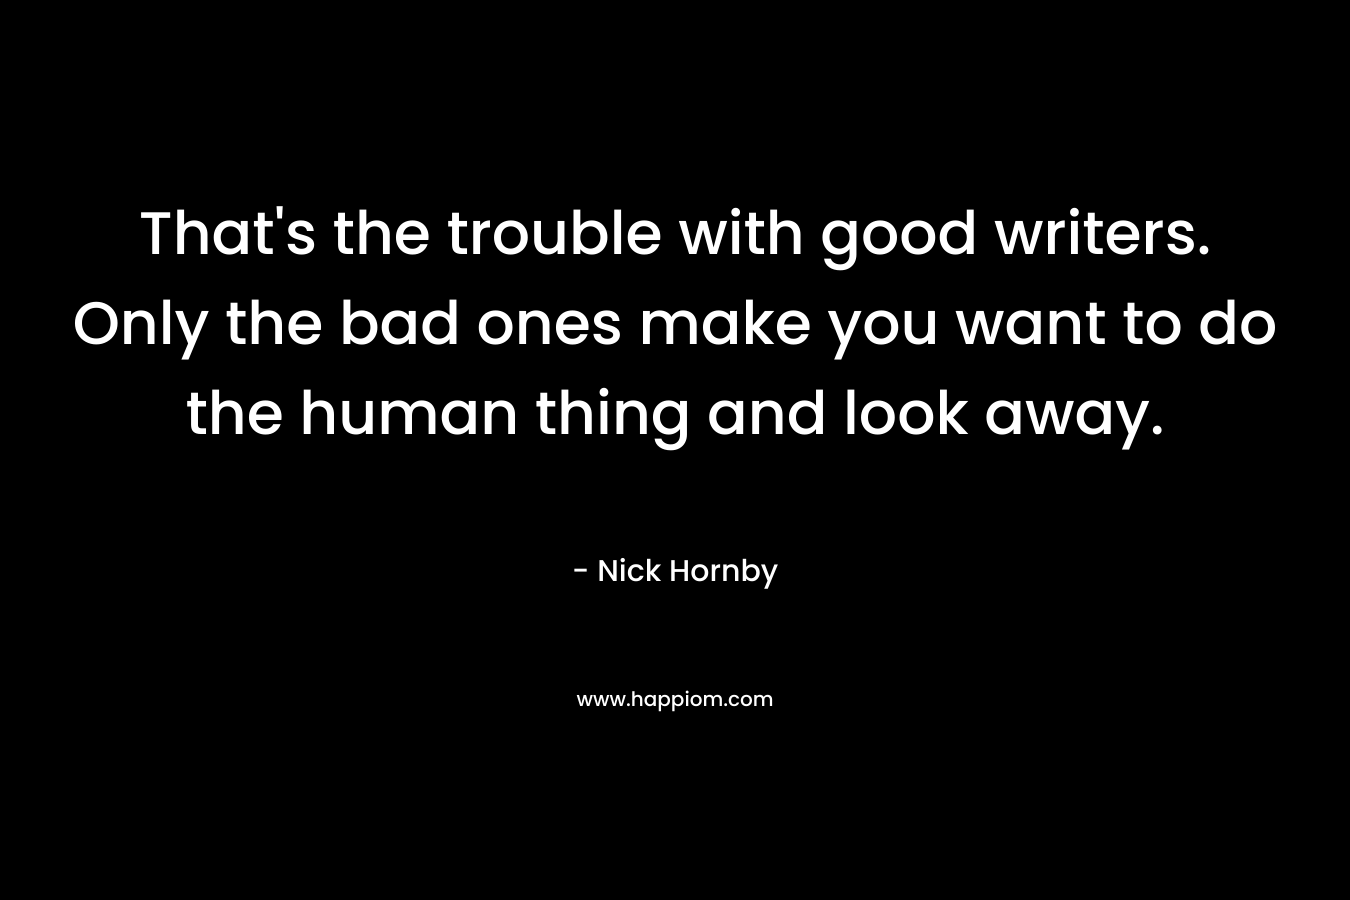 That's the trouble with good writers. Only the bad ones make you want to do the human thing and look away.